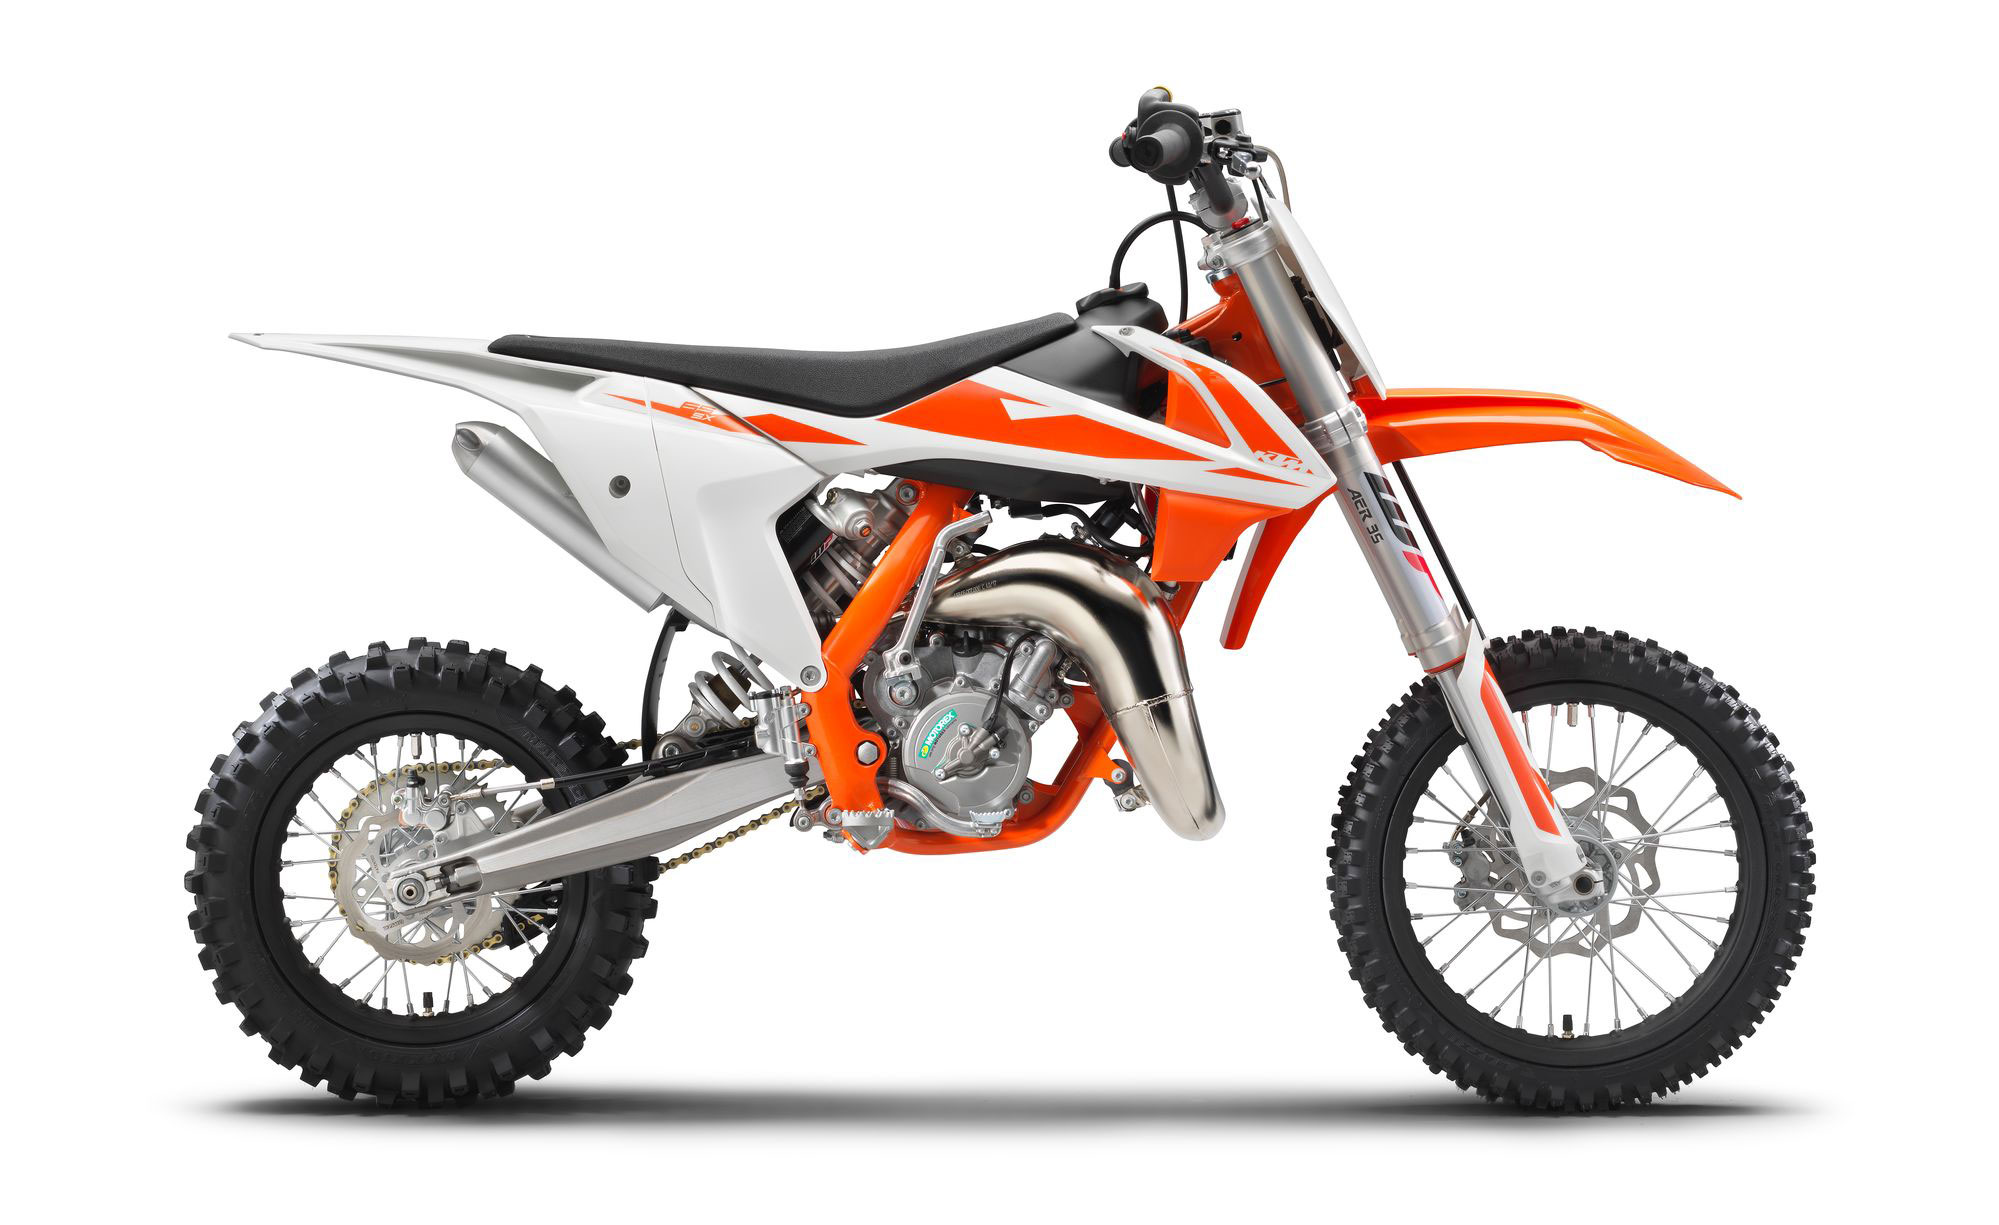 2019 Ktm 65 Sx Guide Total Motorcycle